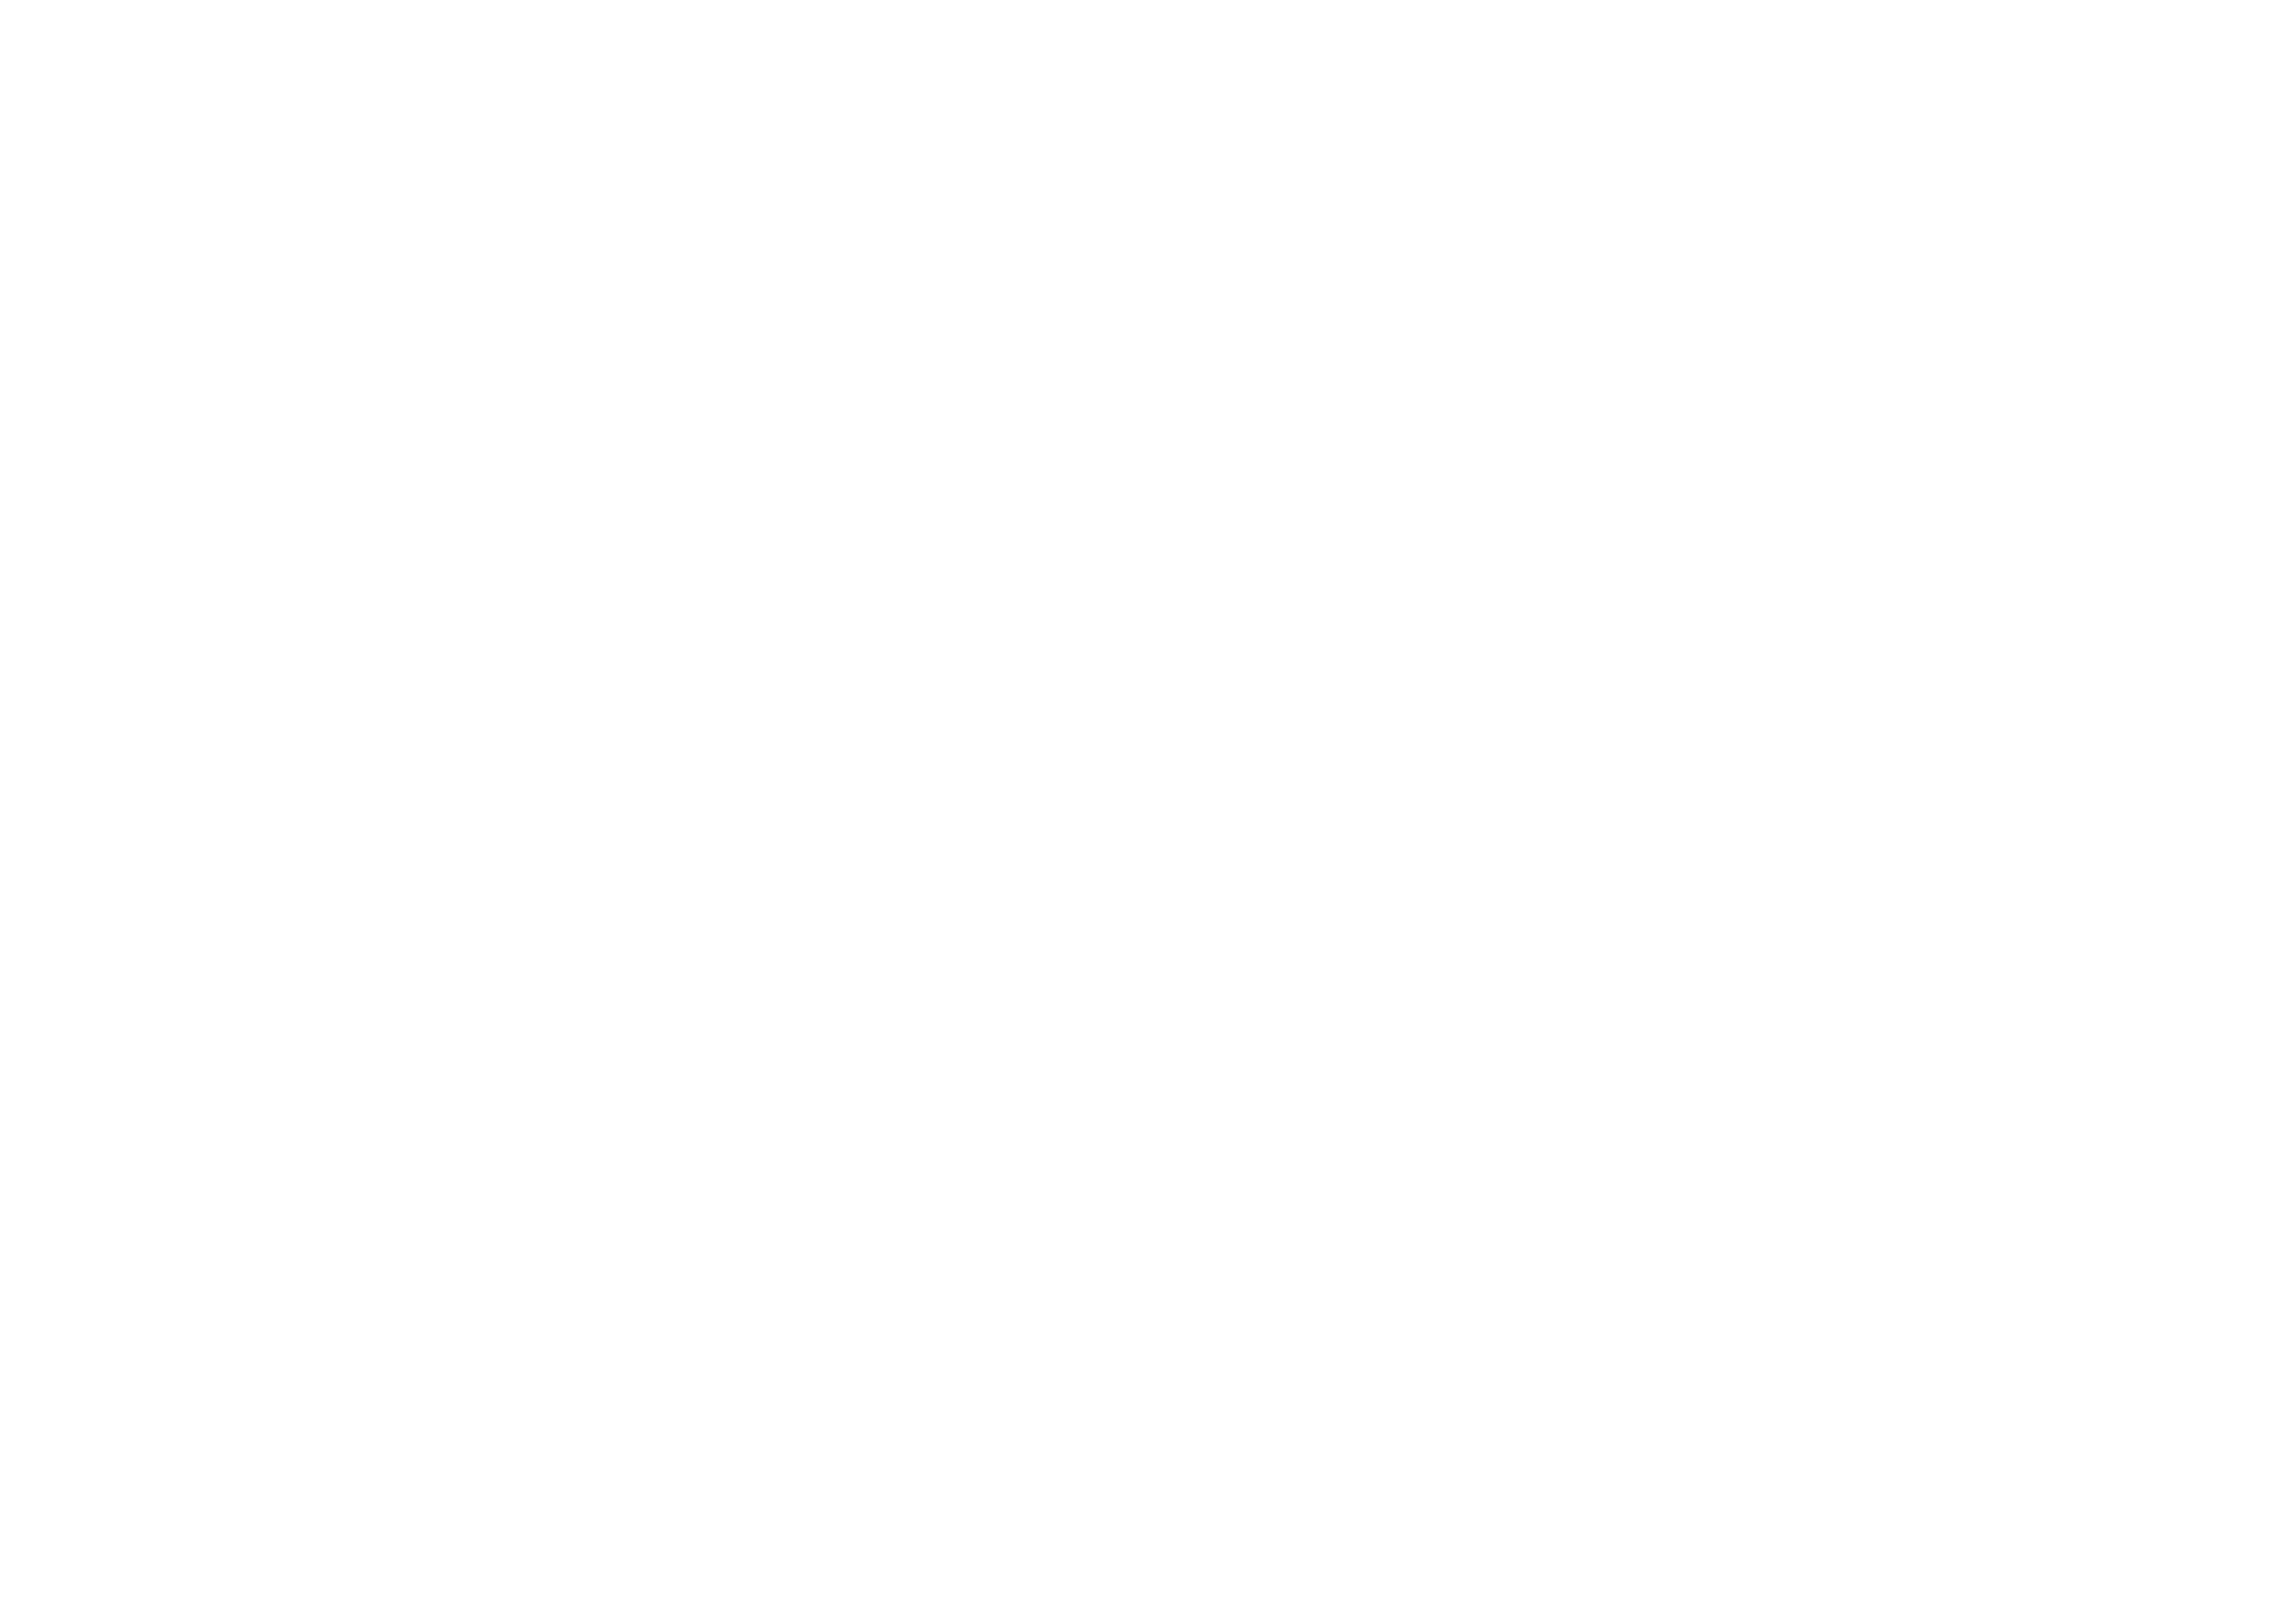 Rayya Nutri Healthy Meals Delivery